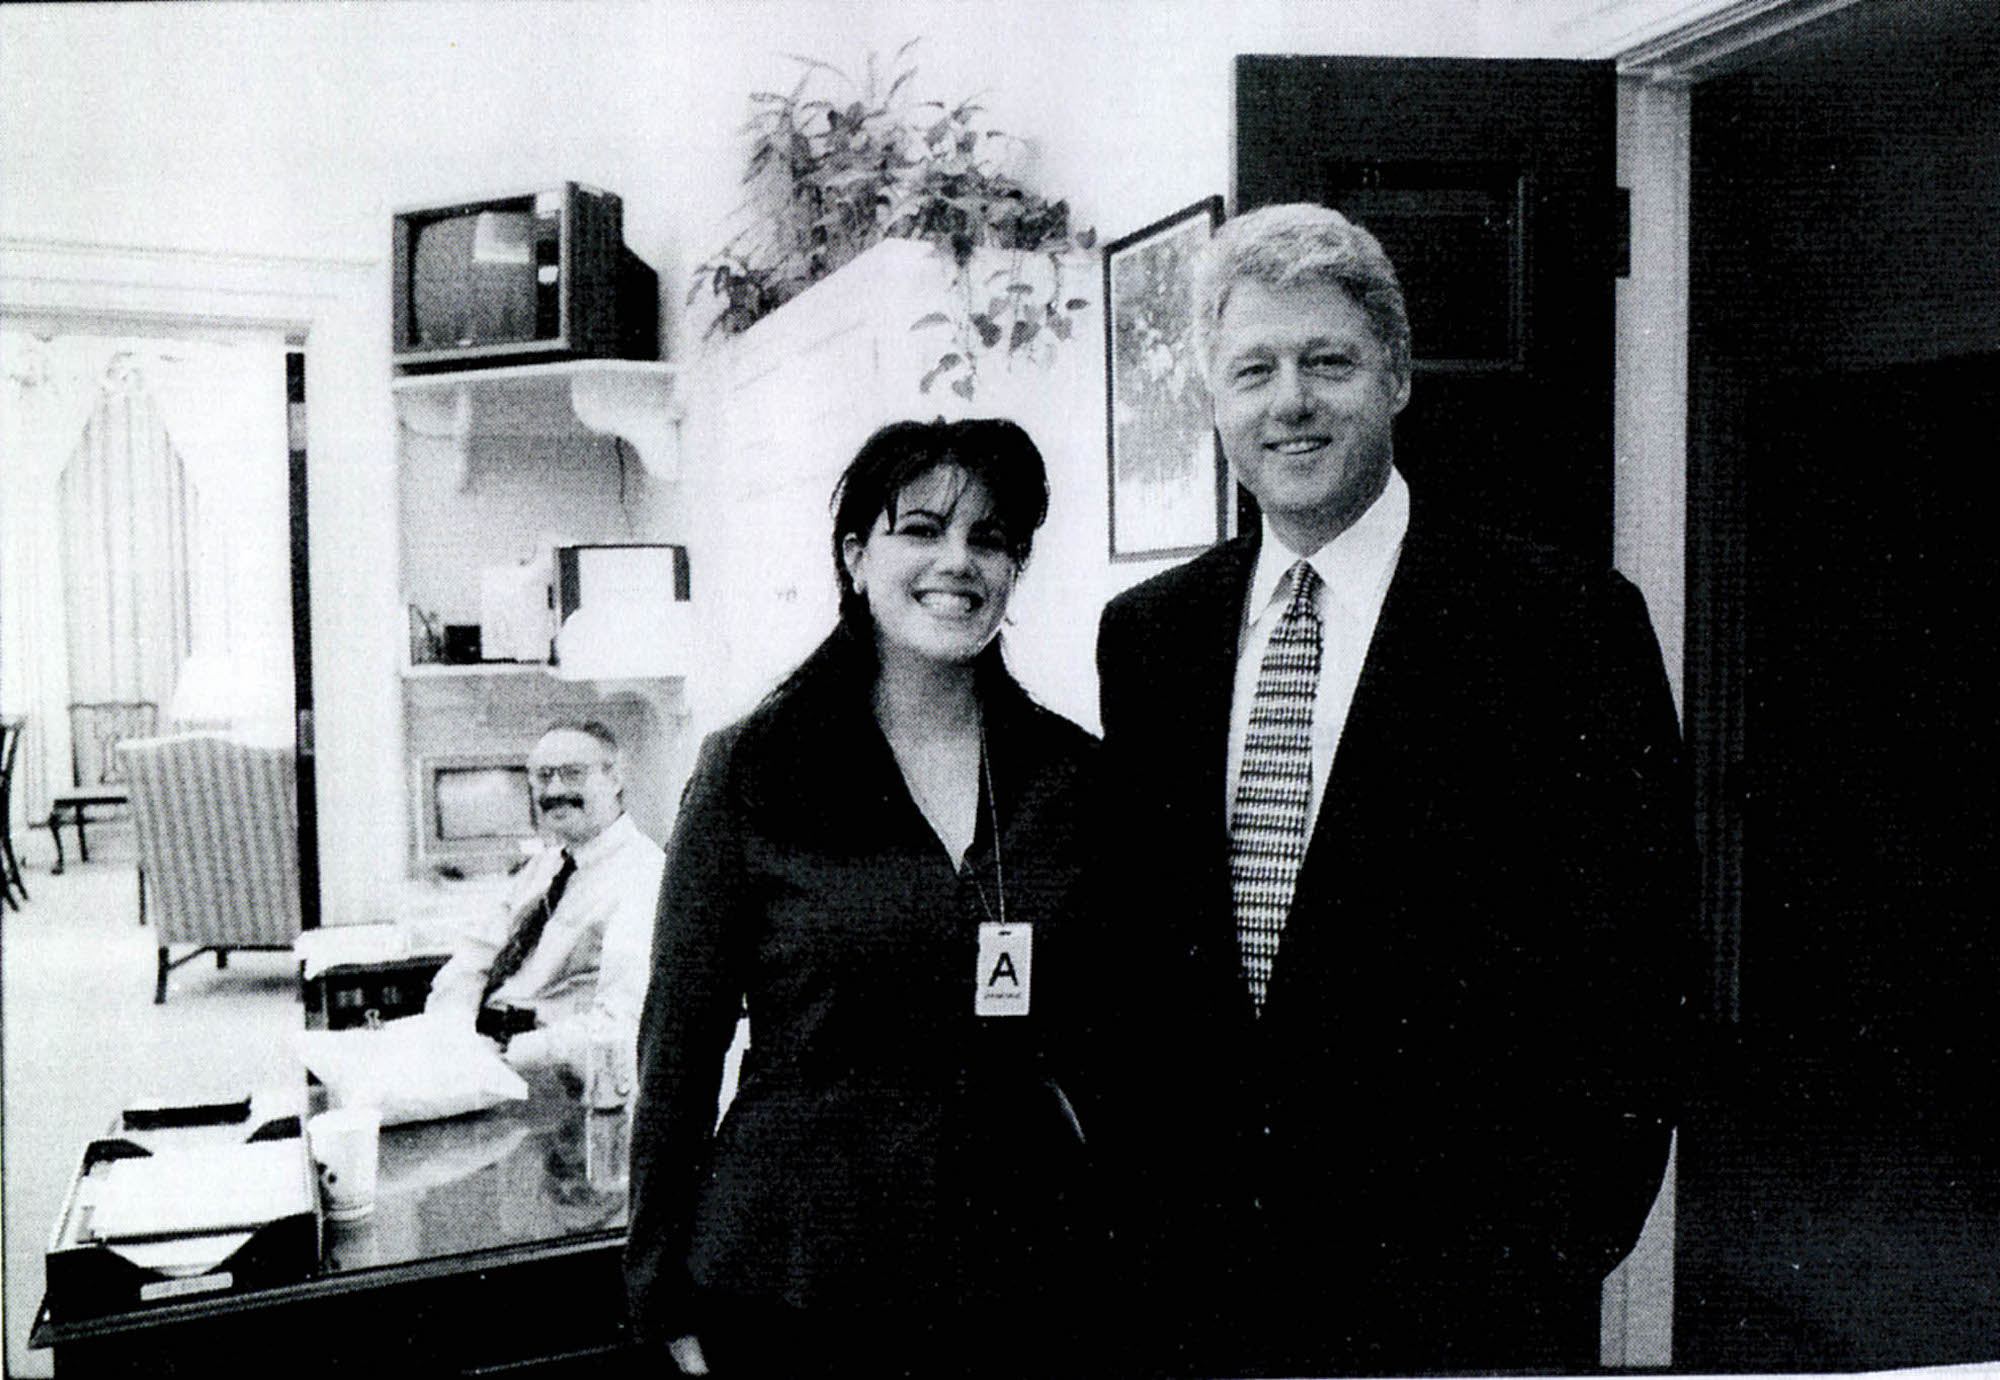 Monica Lewinsky meeting Bill Clinton at a White House function